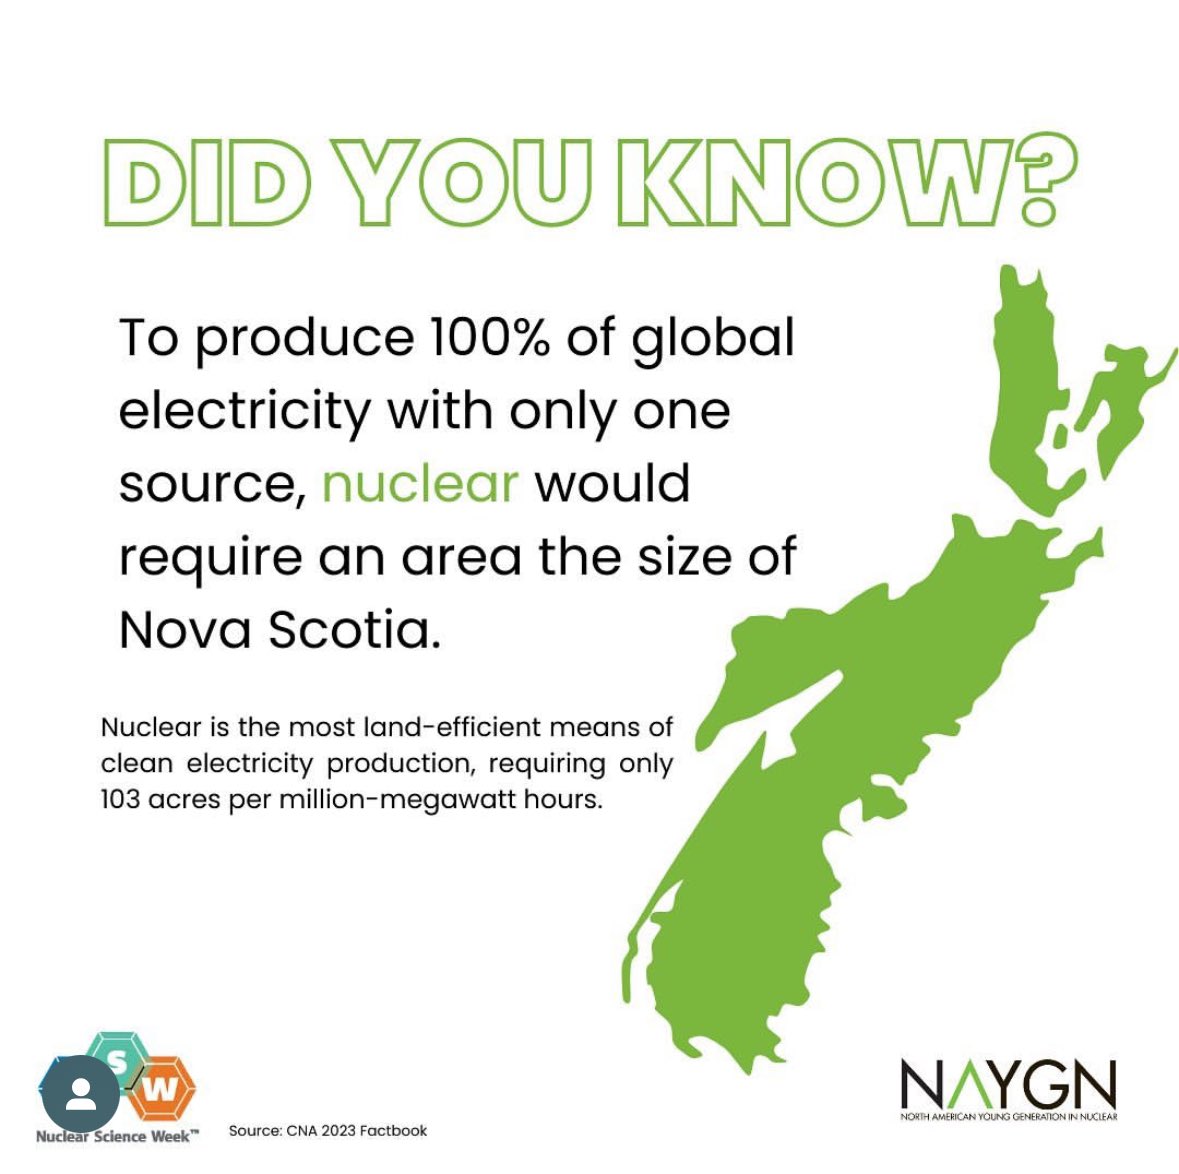 This #NuclearFact from the @NA_YGN #NewBrunswick 🇨🇦 Chapter! #TheMoreYouKnow 🌈
@nuclearsciweek ⚛️
#NuclearScienceWeek ⚛️